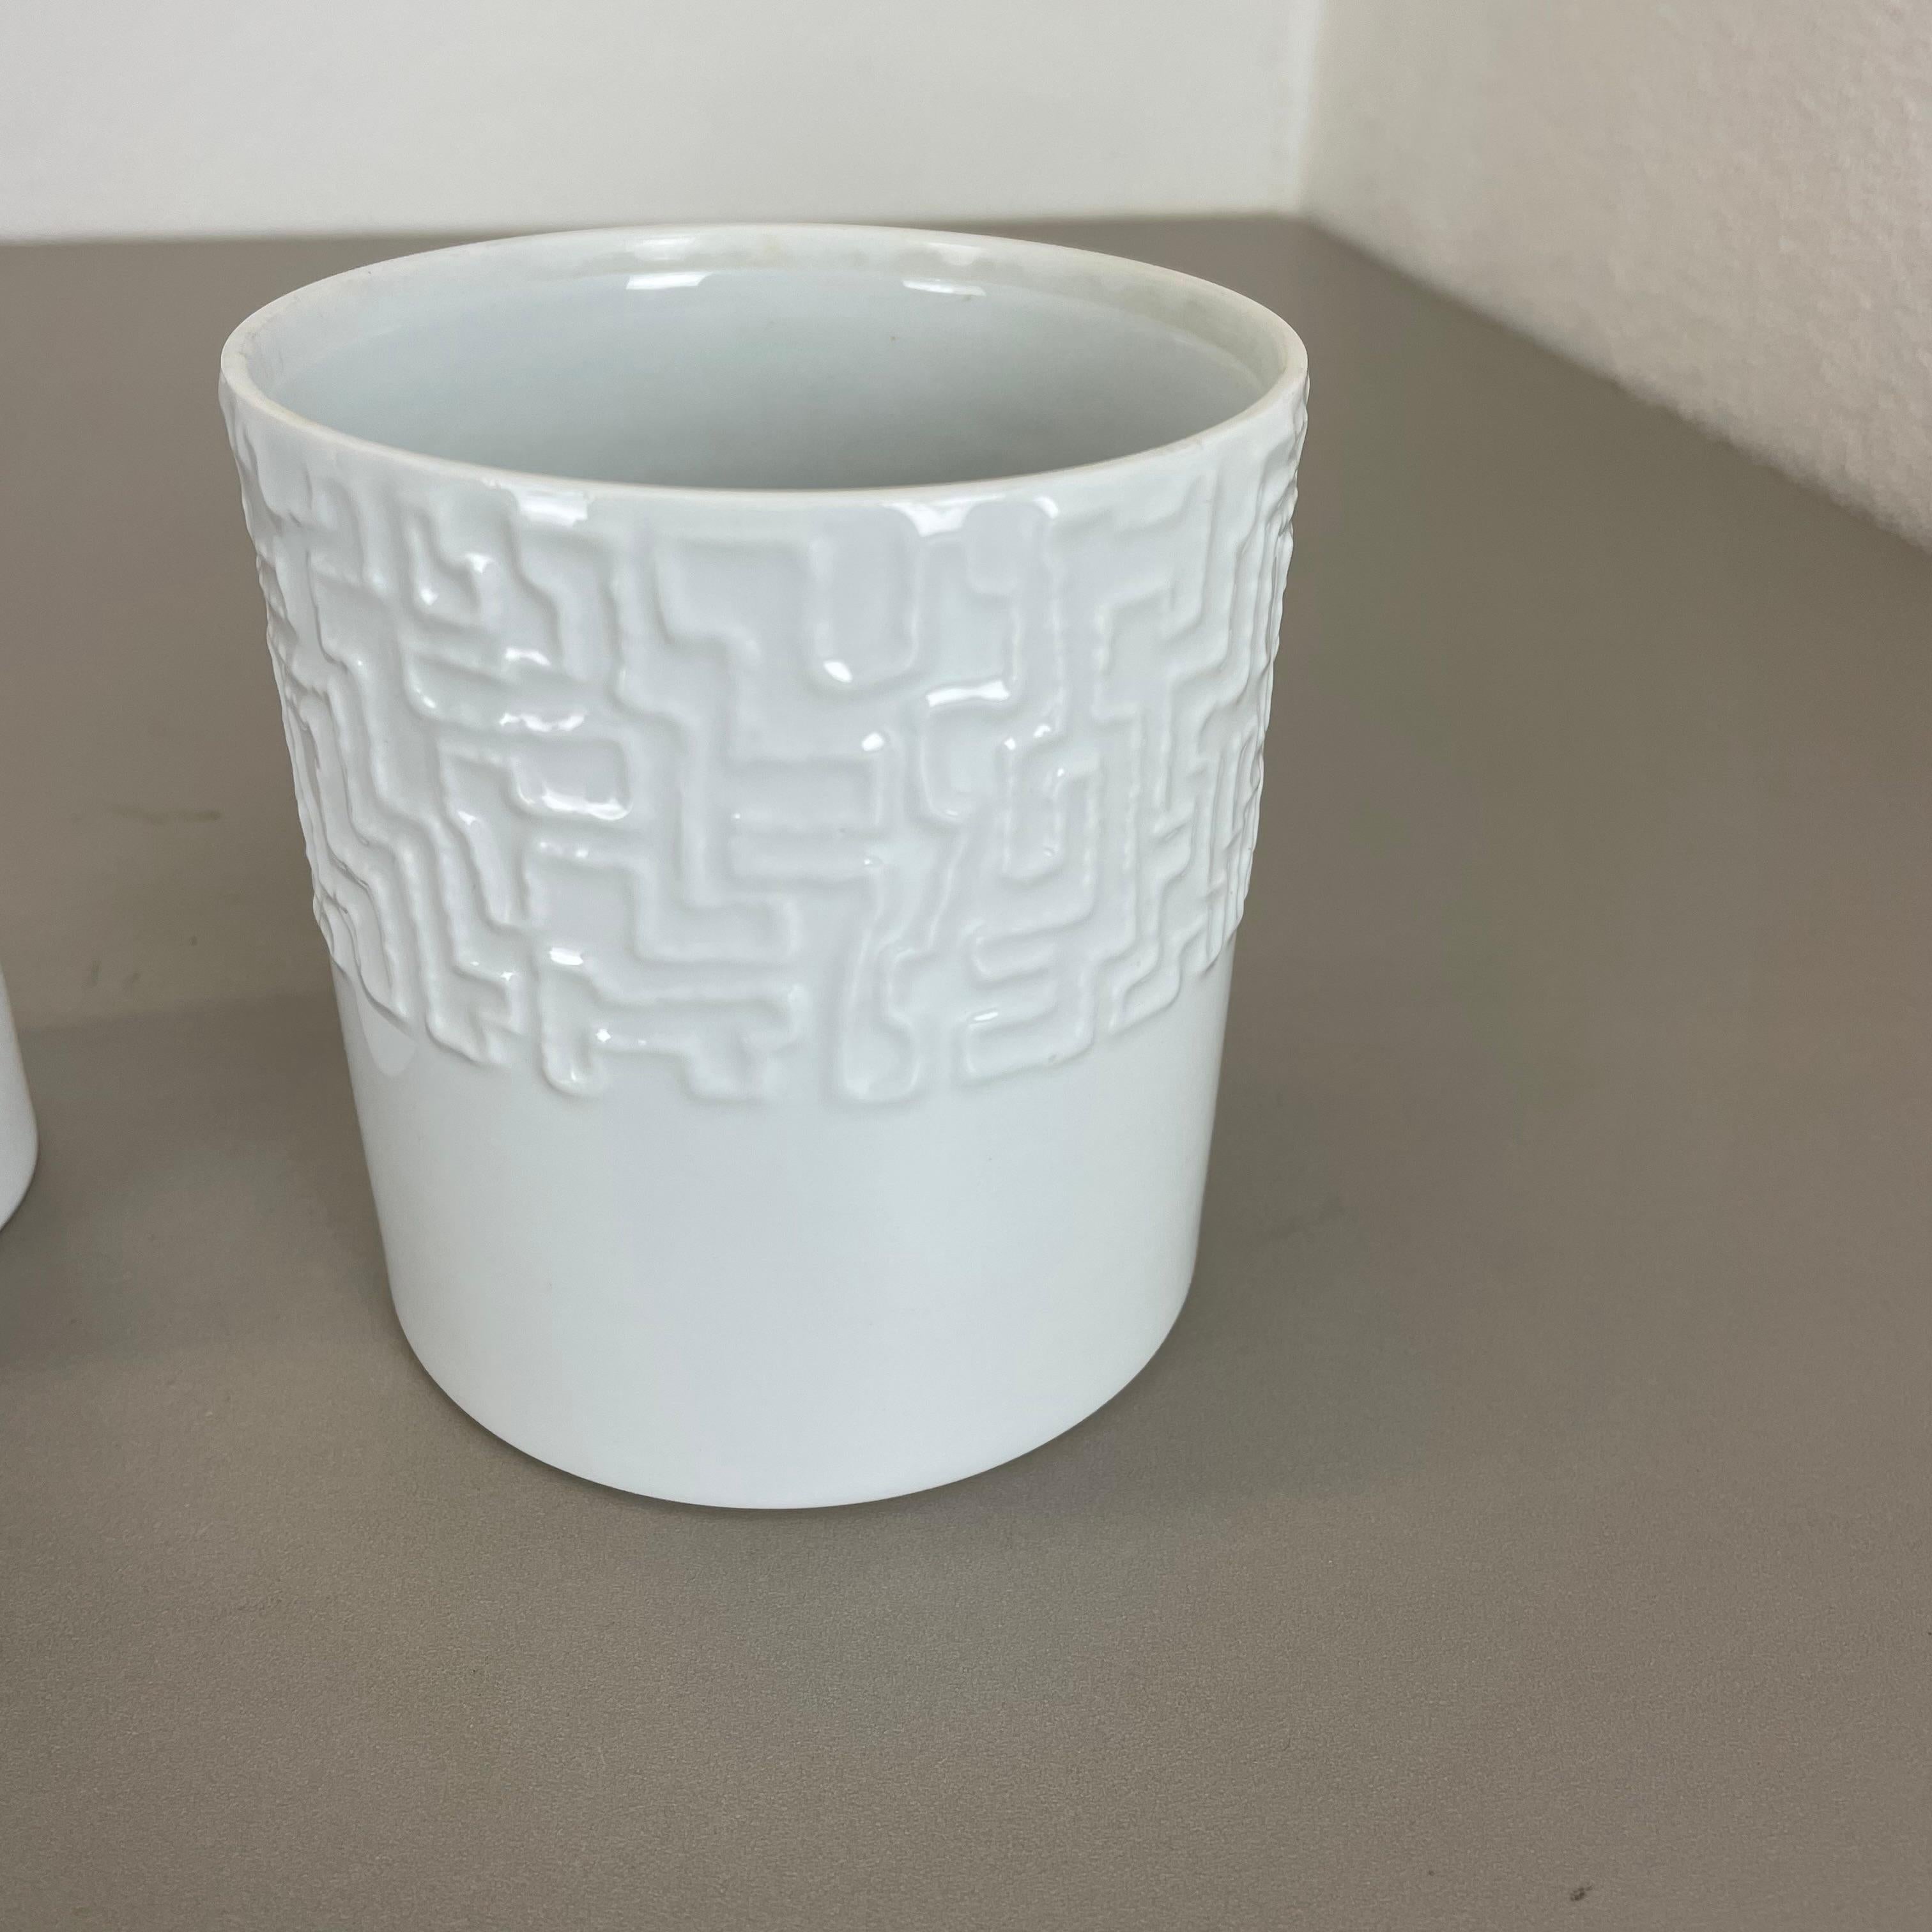 Set of 2 Abstract porcelain Vases by Cuno Fischer for Rosenthal, Germany, 1980s For Sale 5